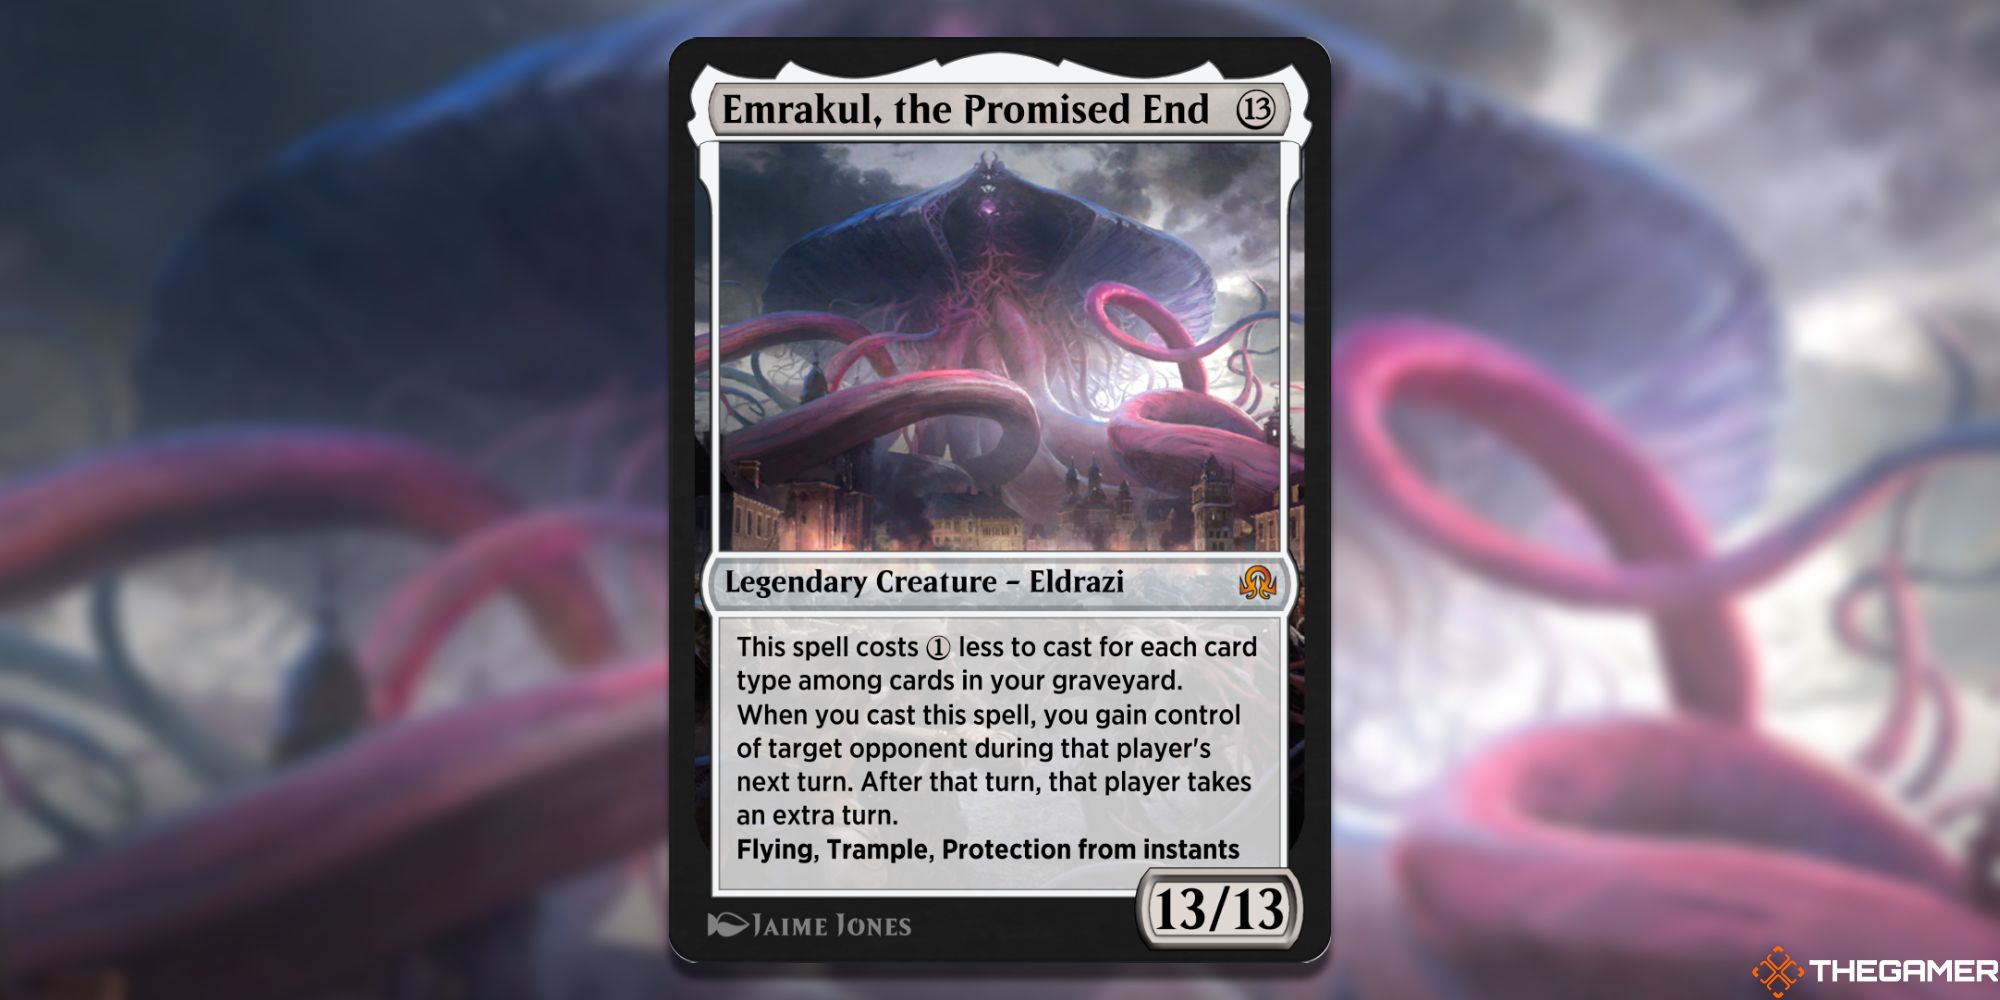 Emrakul the Promised End card image from Magic: The Gathering, illustration by Jamie Jones.